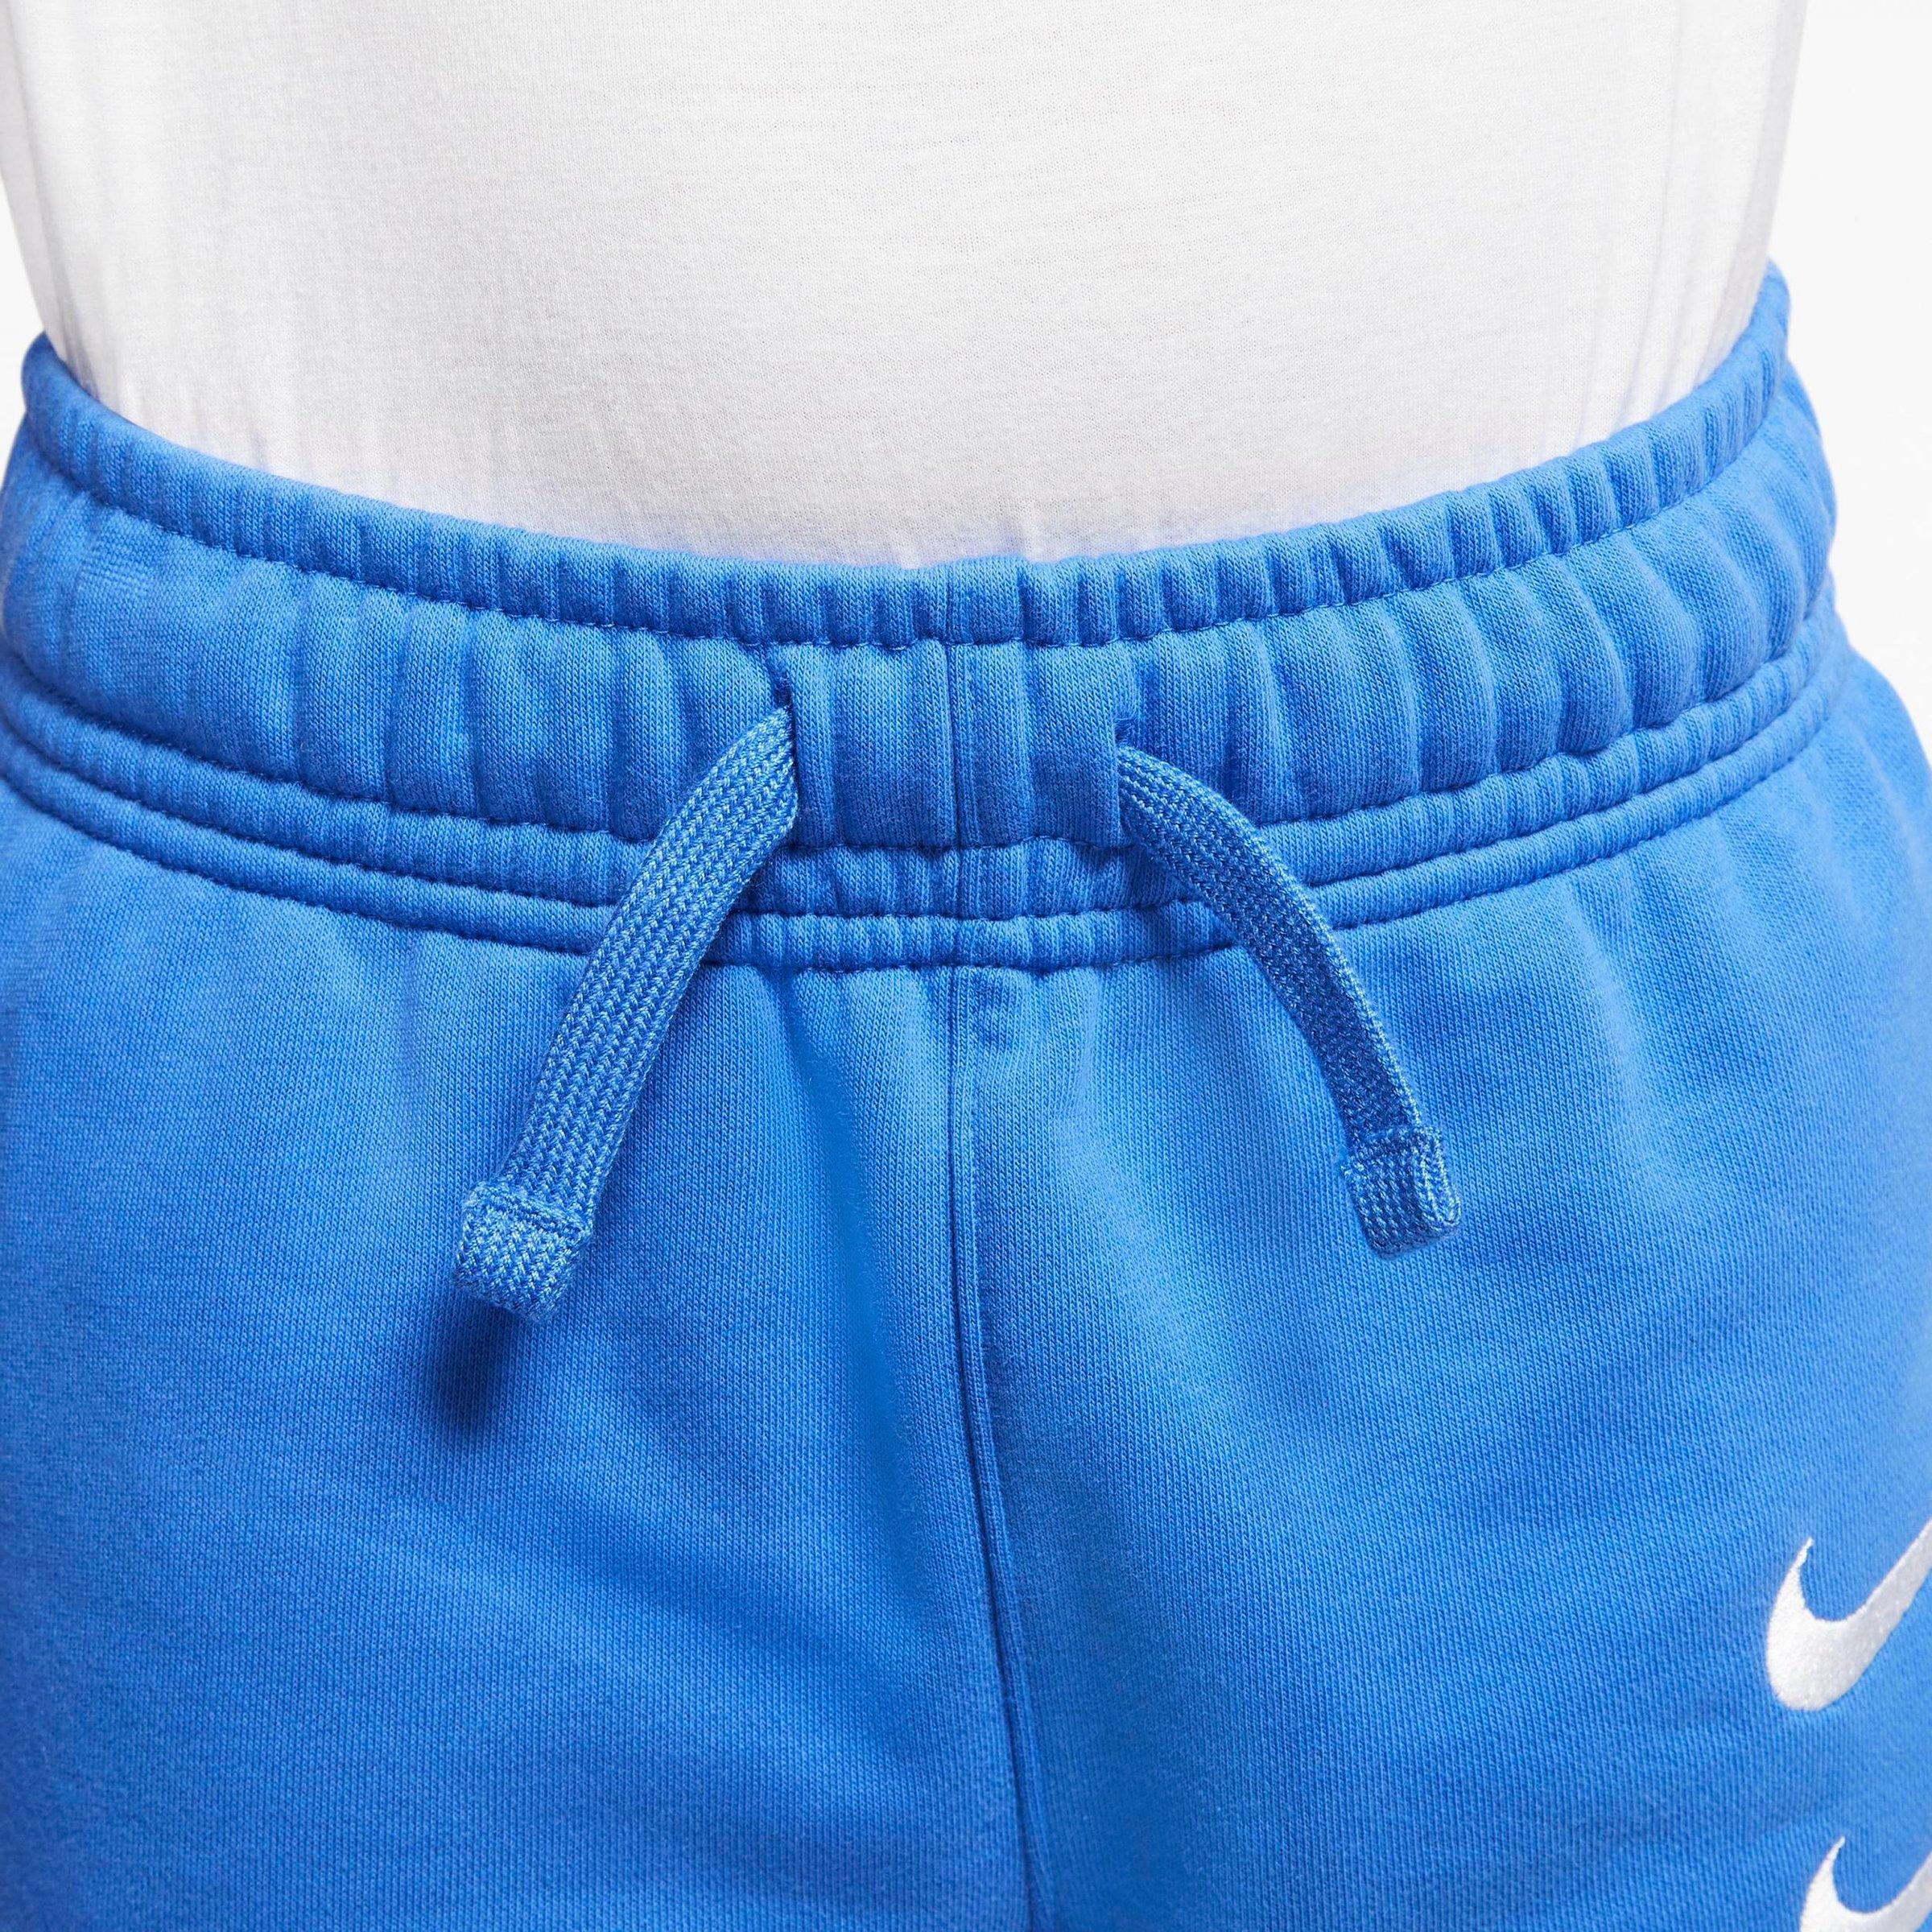 nike pacific blue shorts